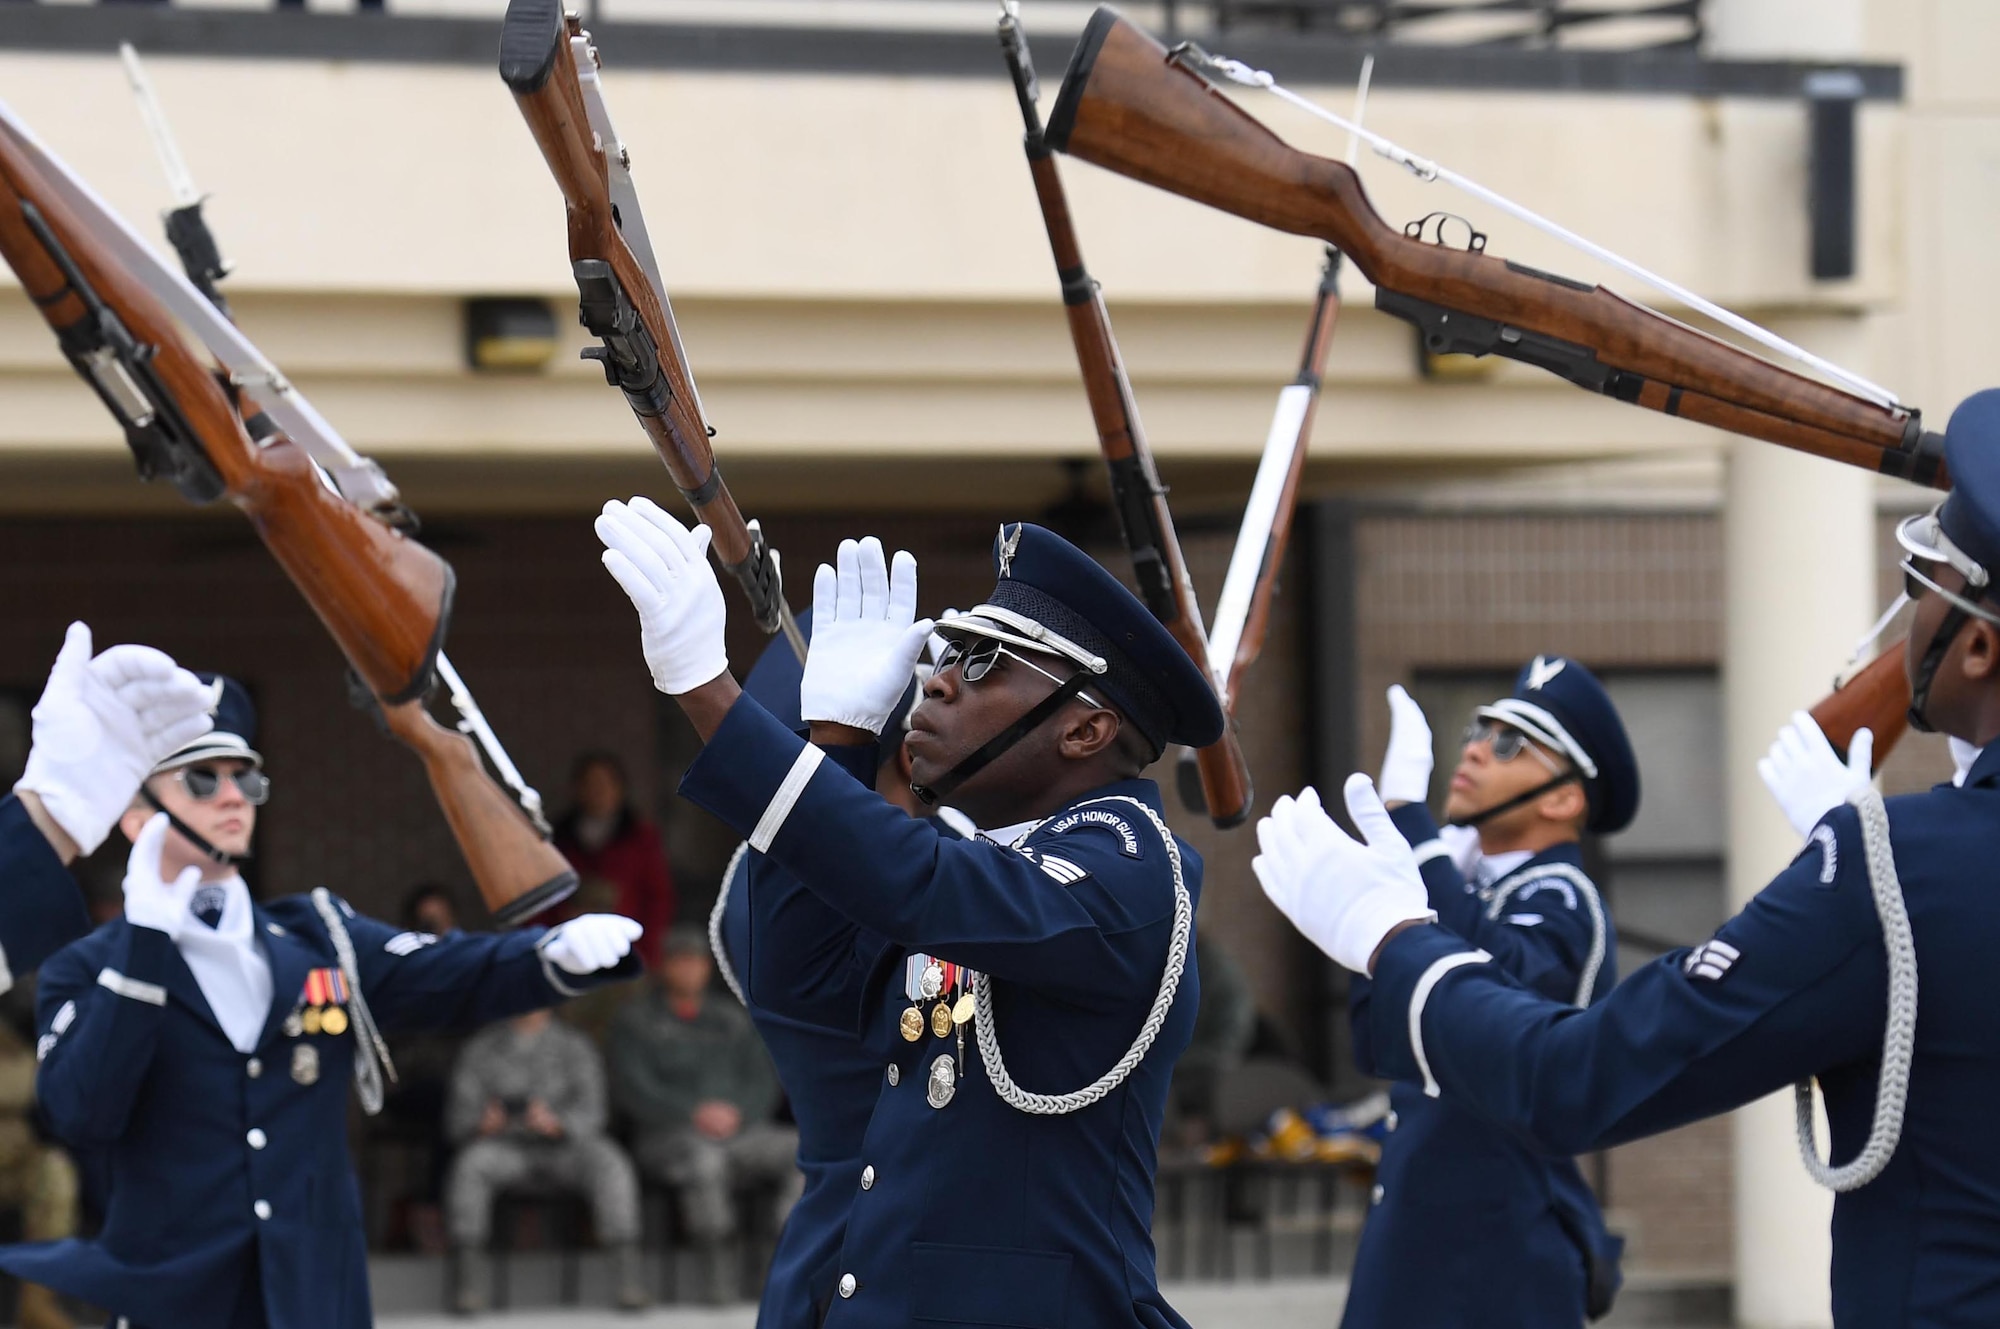 U.S. Air Force Senior Airman Colby Marshall, U.S. Air Force Honor Guard Drill Team member, participates in the debut performance of the team's 2019 routine in front of Keesler leadership and 81st Training Group Airmen on the Levitow Training Support Facility drill pad at Keesler Air Force Base, Mississippi, Feb. 8, 2019. The team comes to Keesler every year for five weeks to develop a new routine that they will use throughout the year. (U.S. Air Force photo by Kemberly Groue)